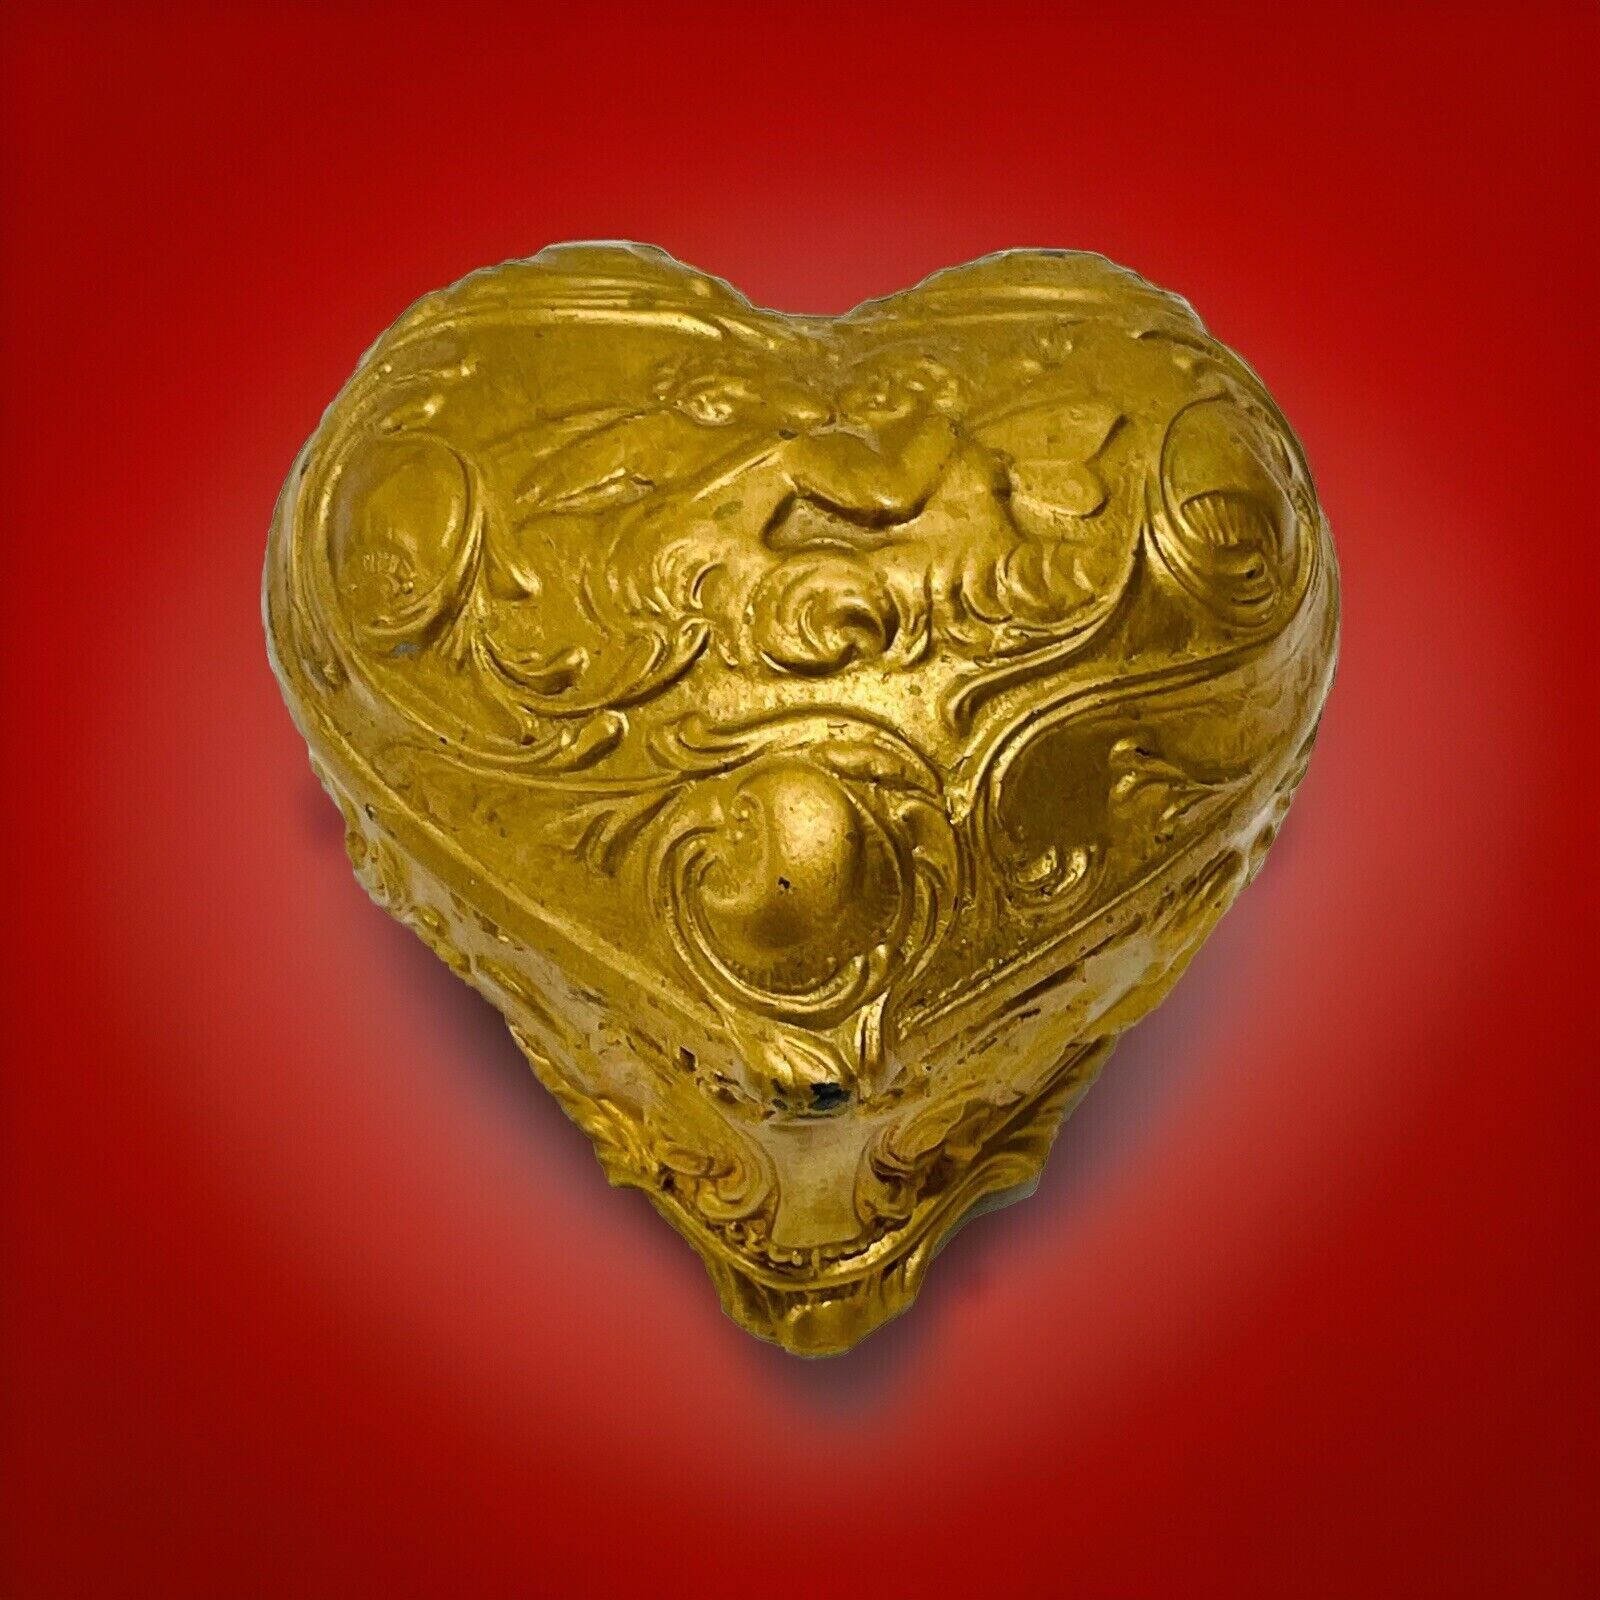 Heart Shaped Art Nouveau Jewelry Casket Antique Metal With Hinged Lid 3.5x3.5in